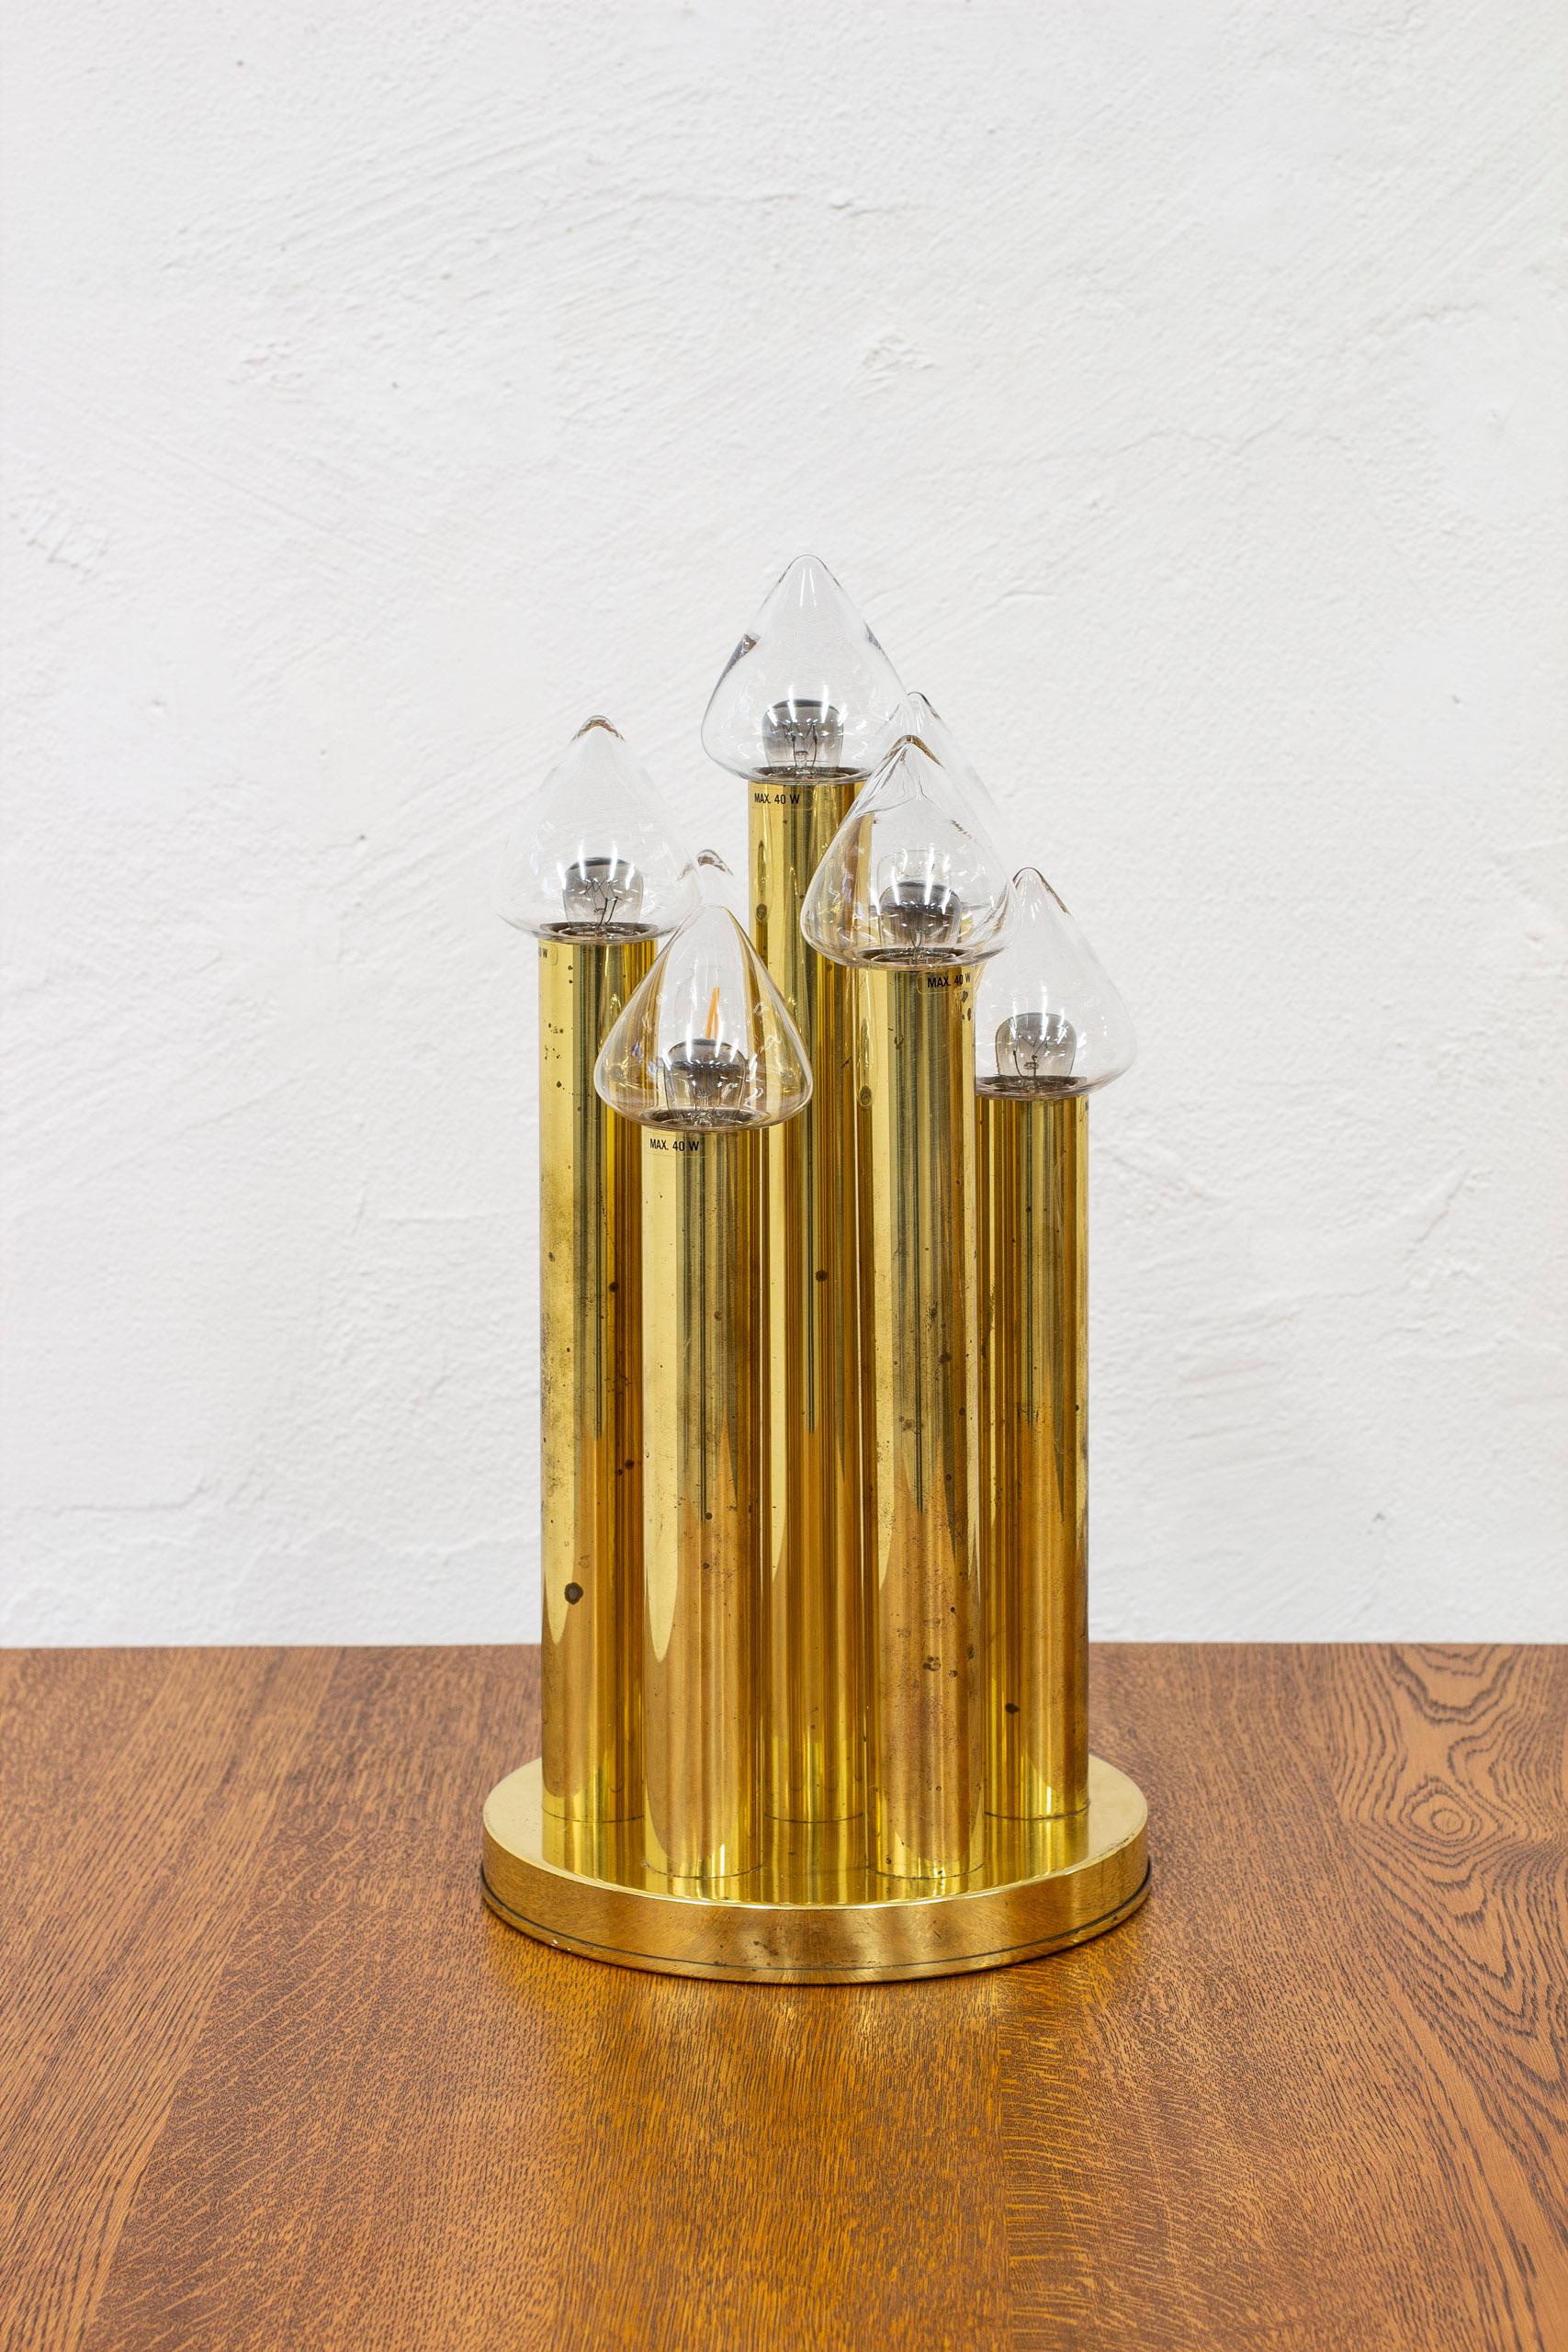 Very rare table lamp model B 231 designed by Hans-Agne Jakobsson. Produced by his own company during the 1960s. Made from seven polished brass pillars standing on a round brass base. Seven hand blown clear glass shades with conical shape. Hans-Agne